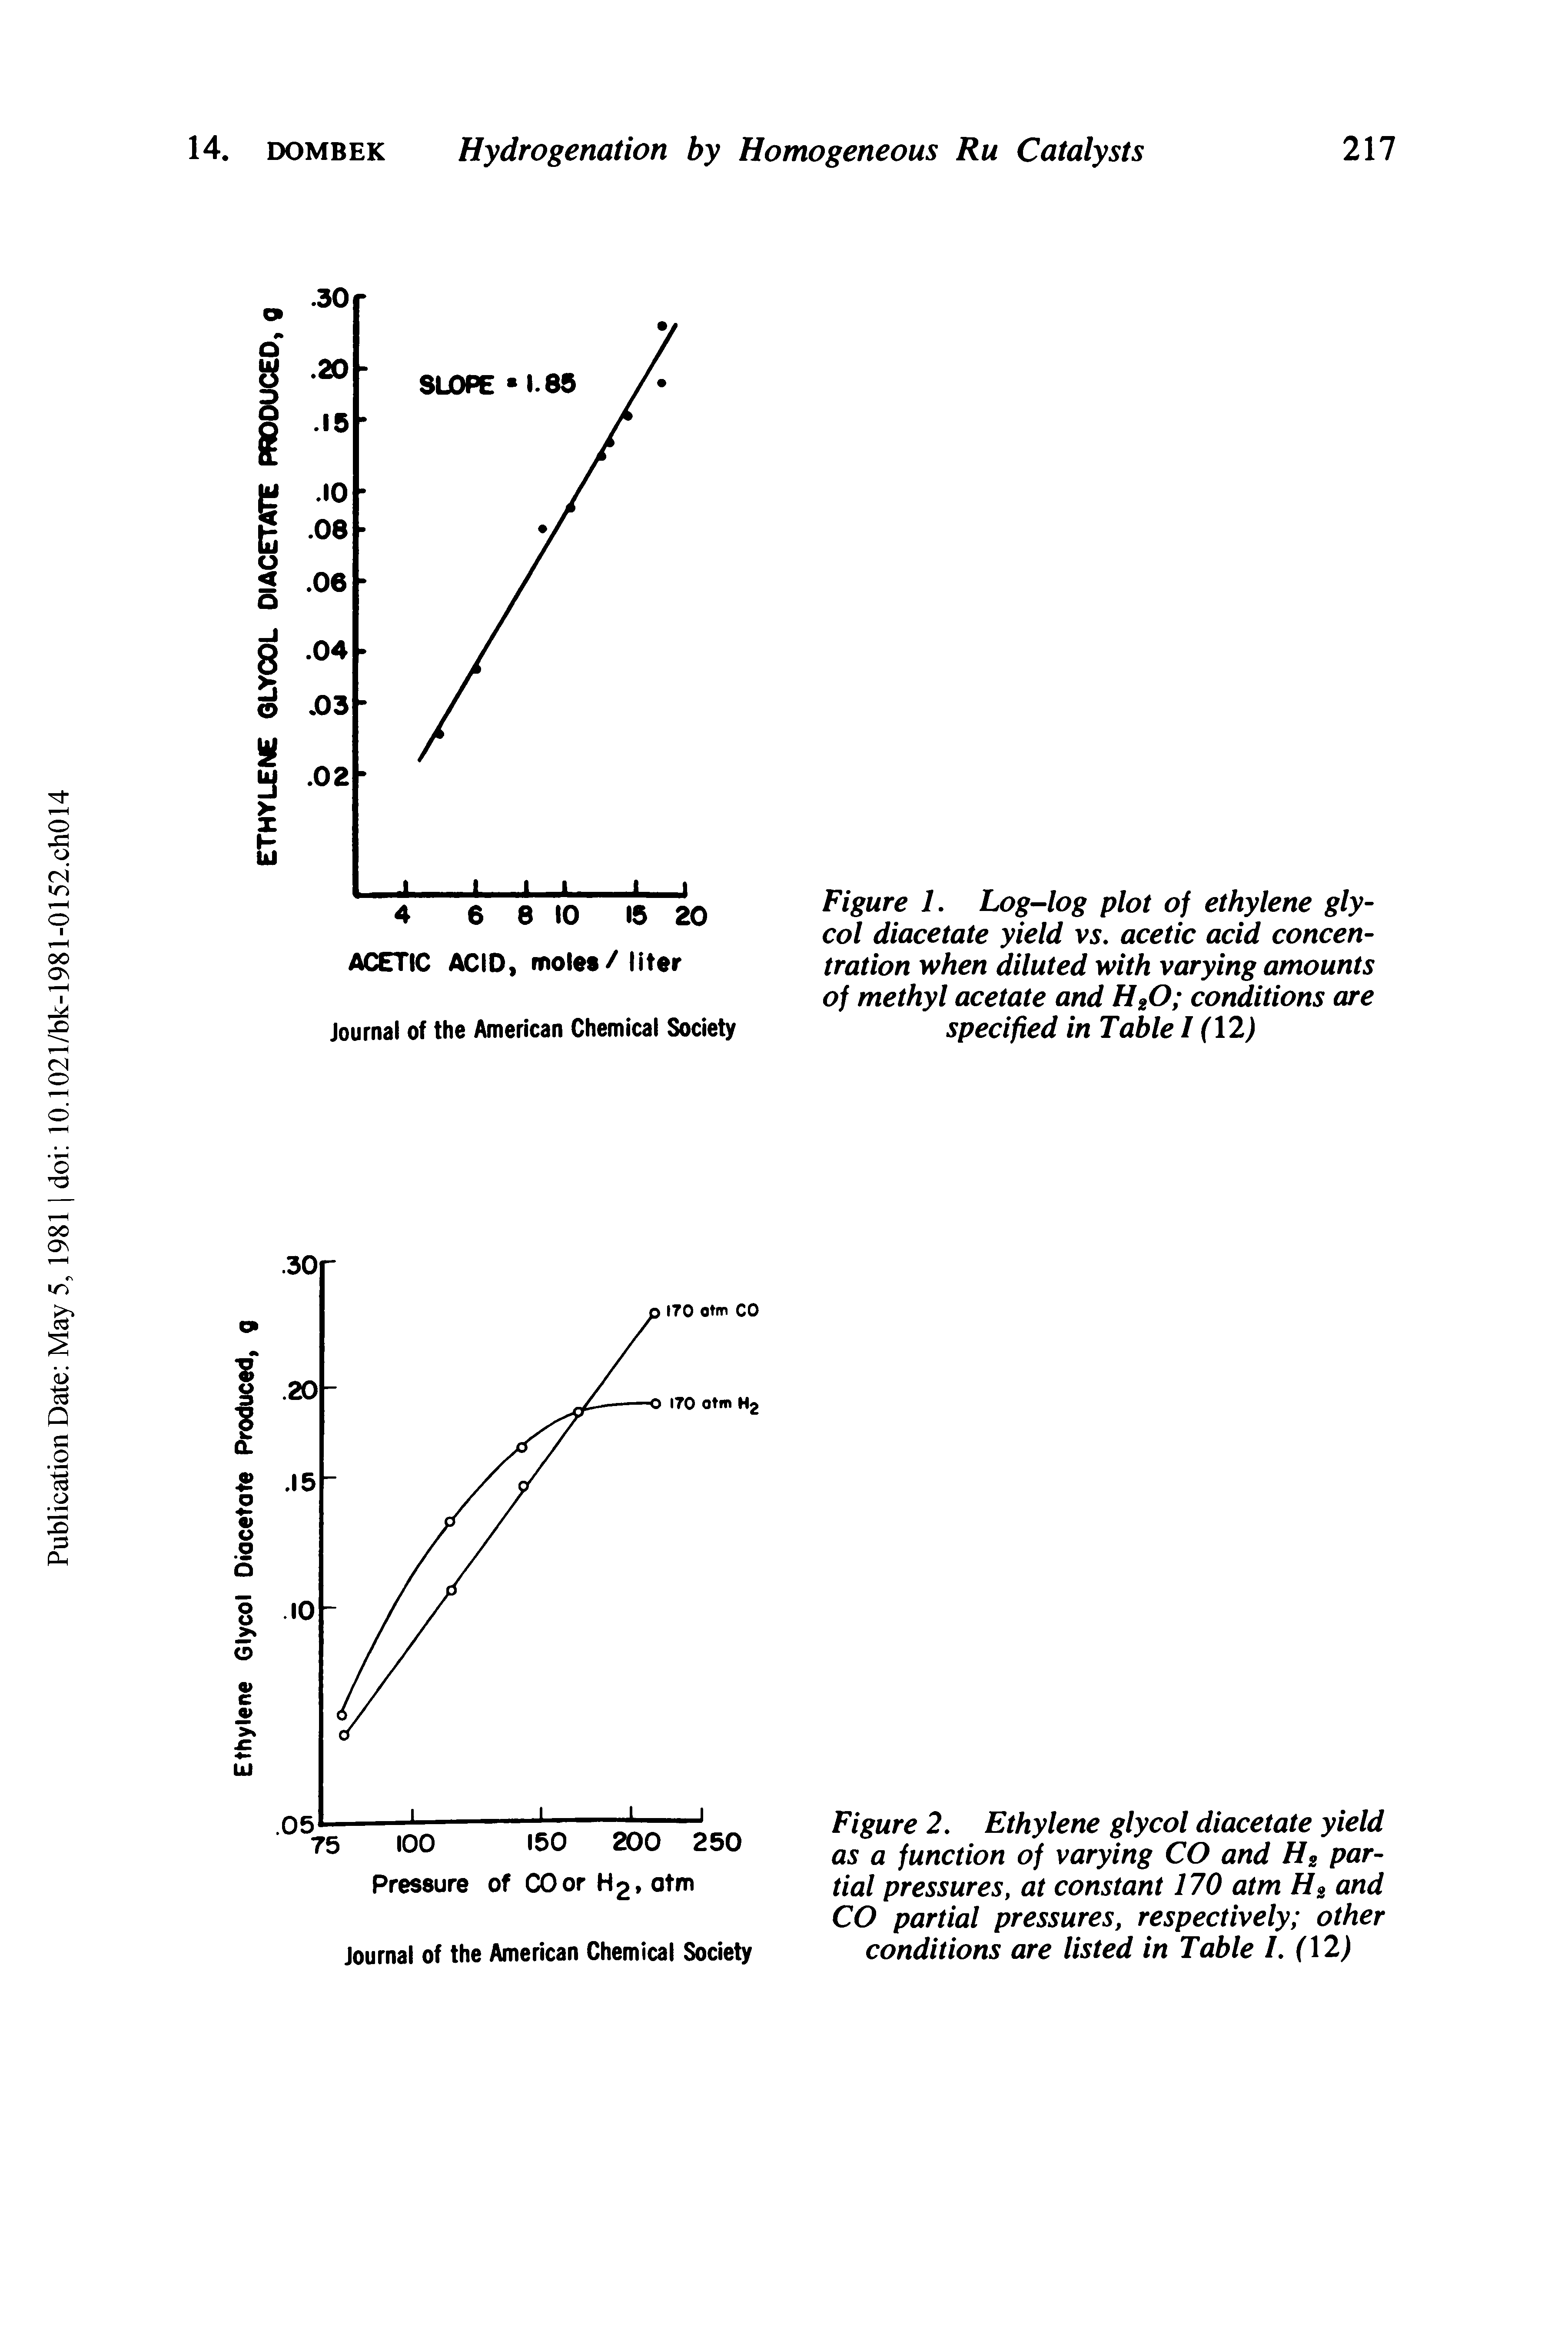 Figure 1. Log-log plot of ethylene glycol diacetate yield vs. acetic acid concentration when diluted with varying amounts of methyl acetate and H20 conditions are specified in Table I (12)...